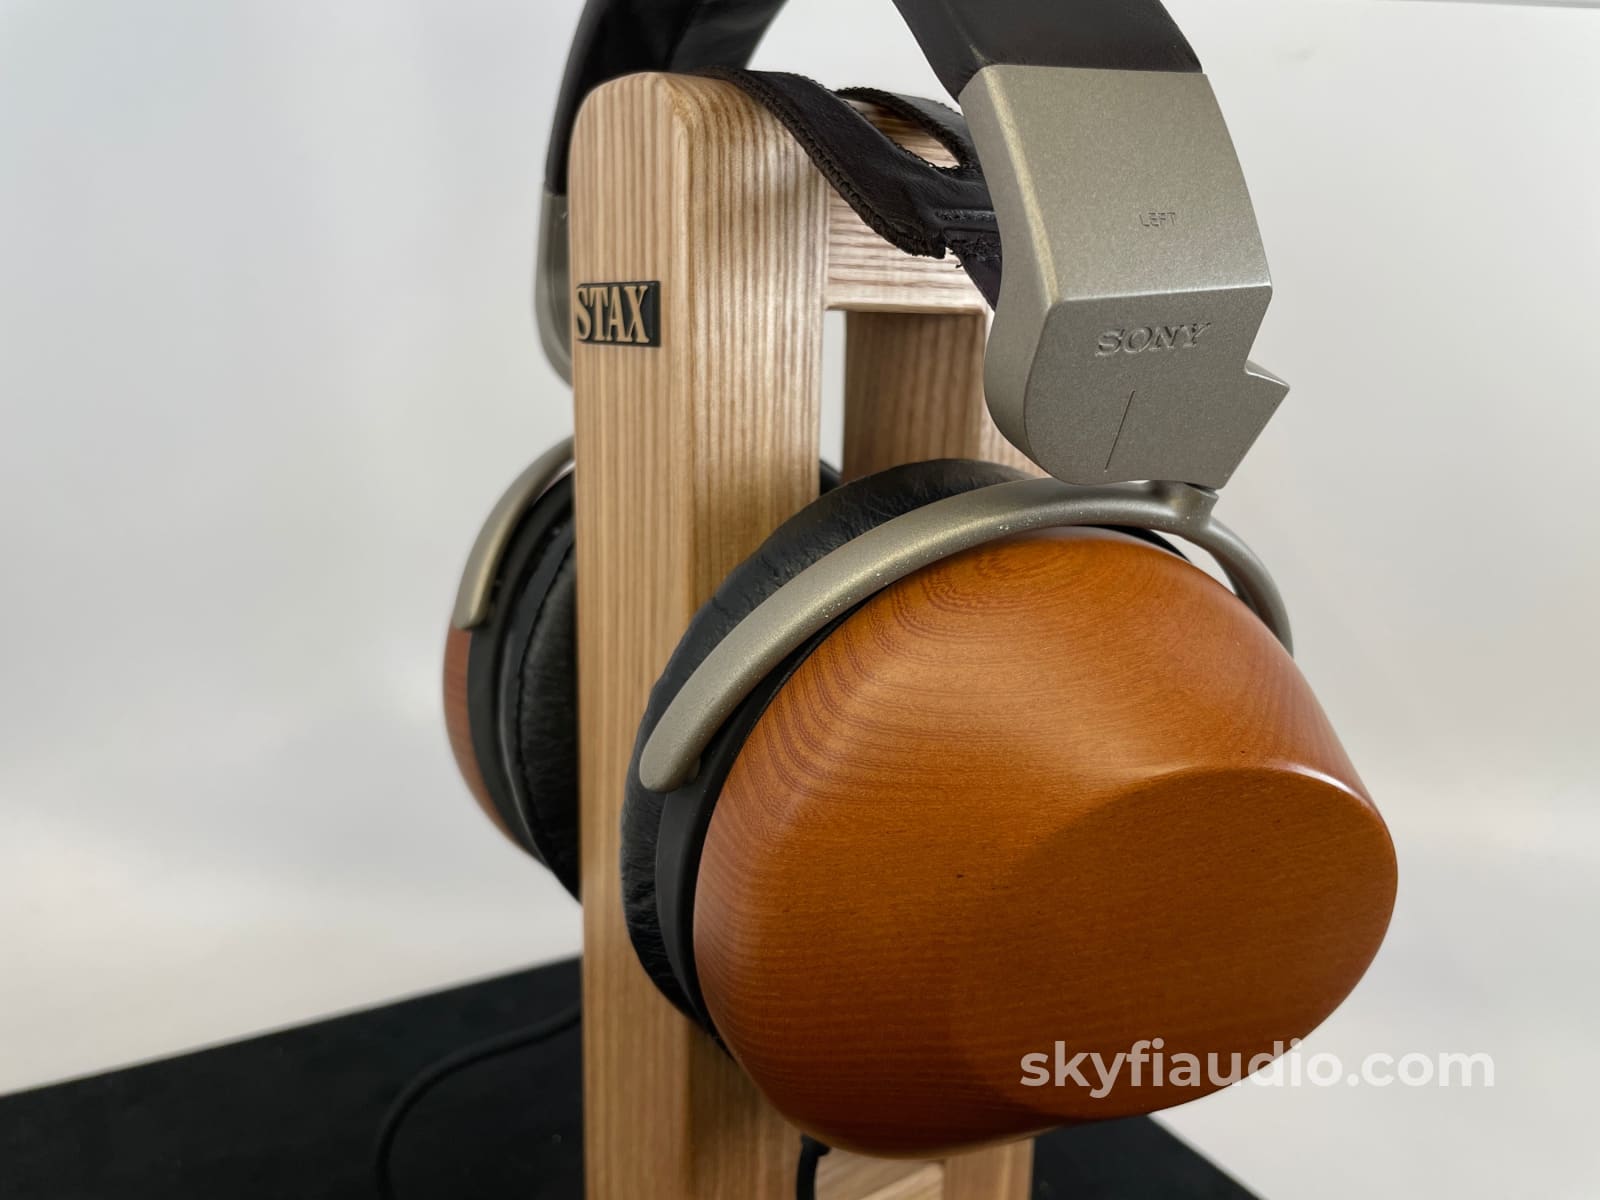 Sony Mdr-R10 Flagship Headphones - Super Rare And Collectible Worlds Best